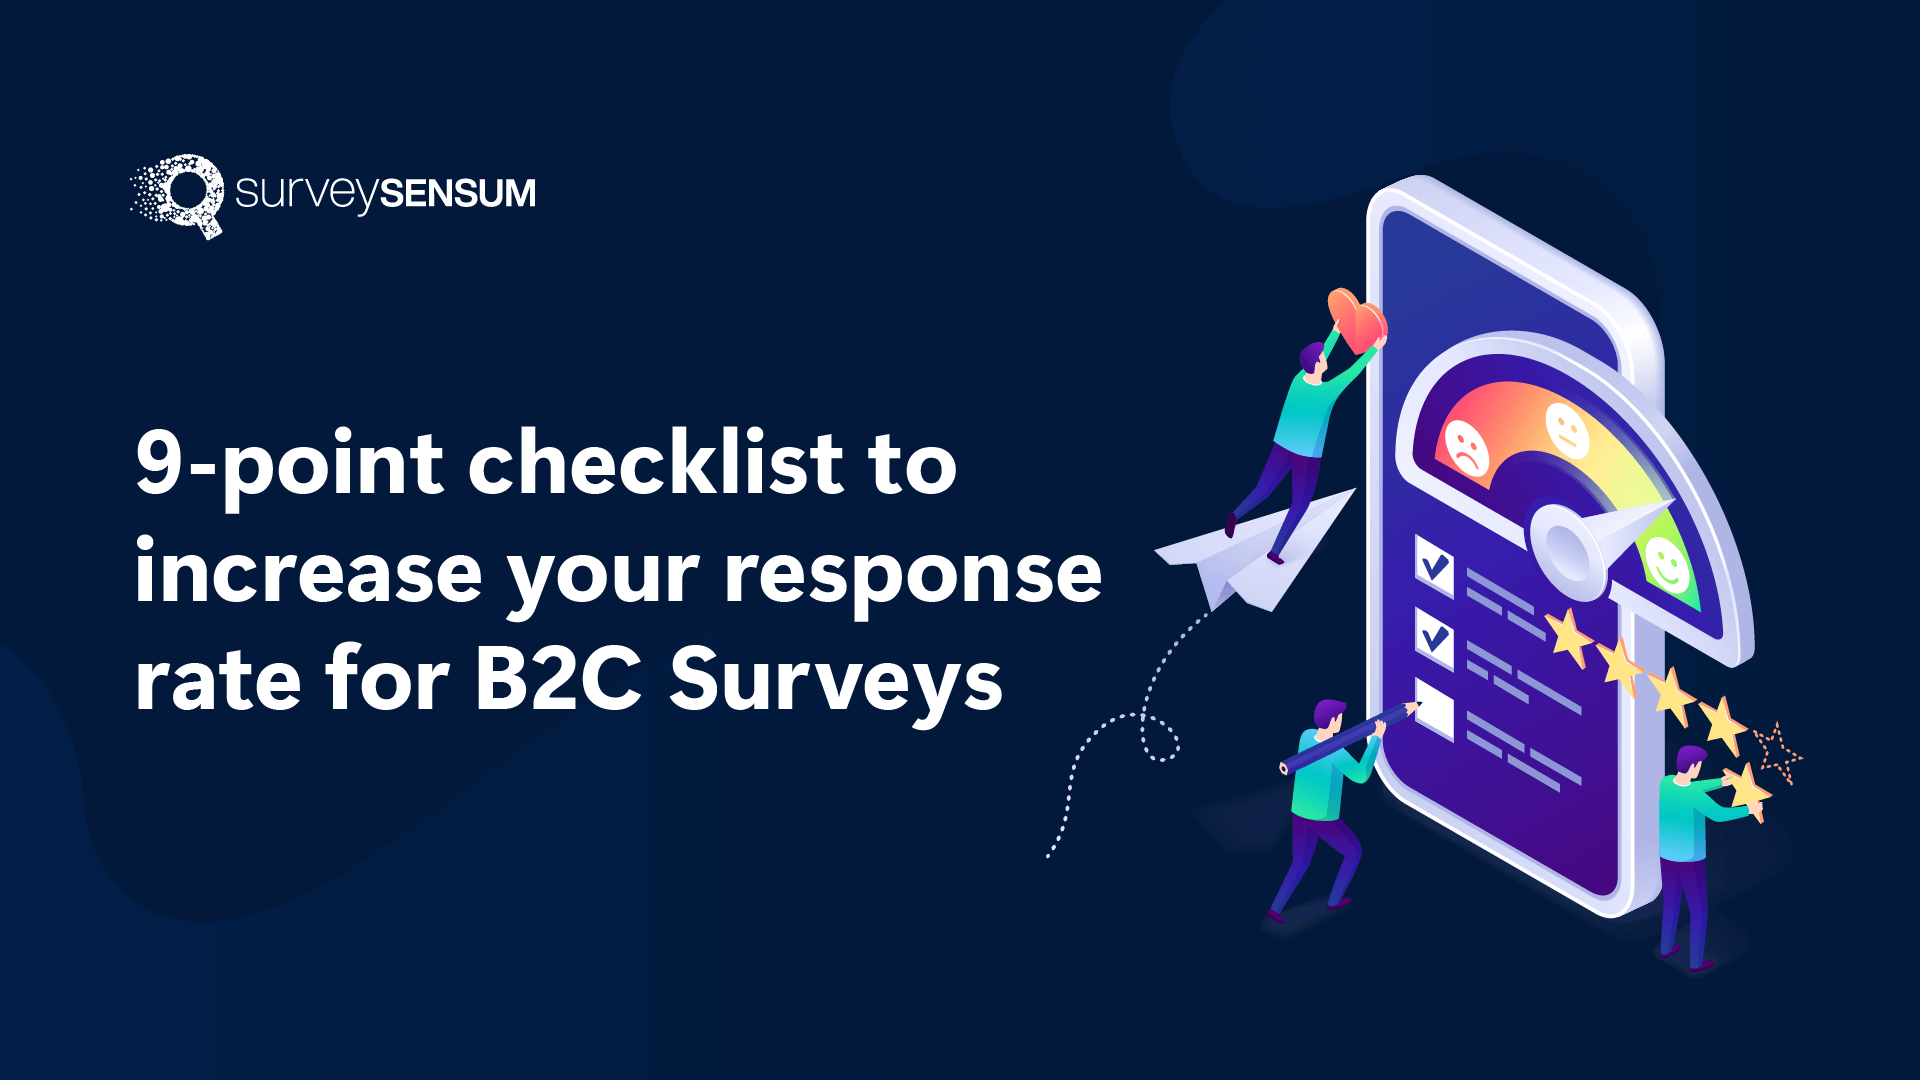 9-point checklist to increase your response rate for B2C Surveys